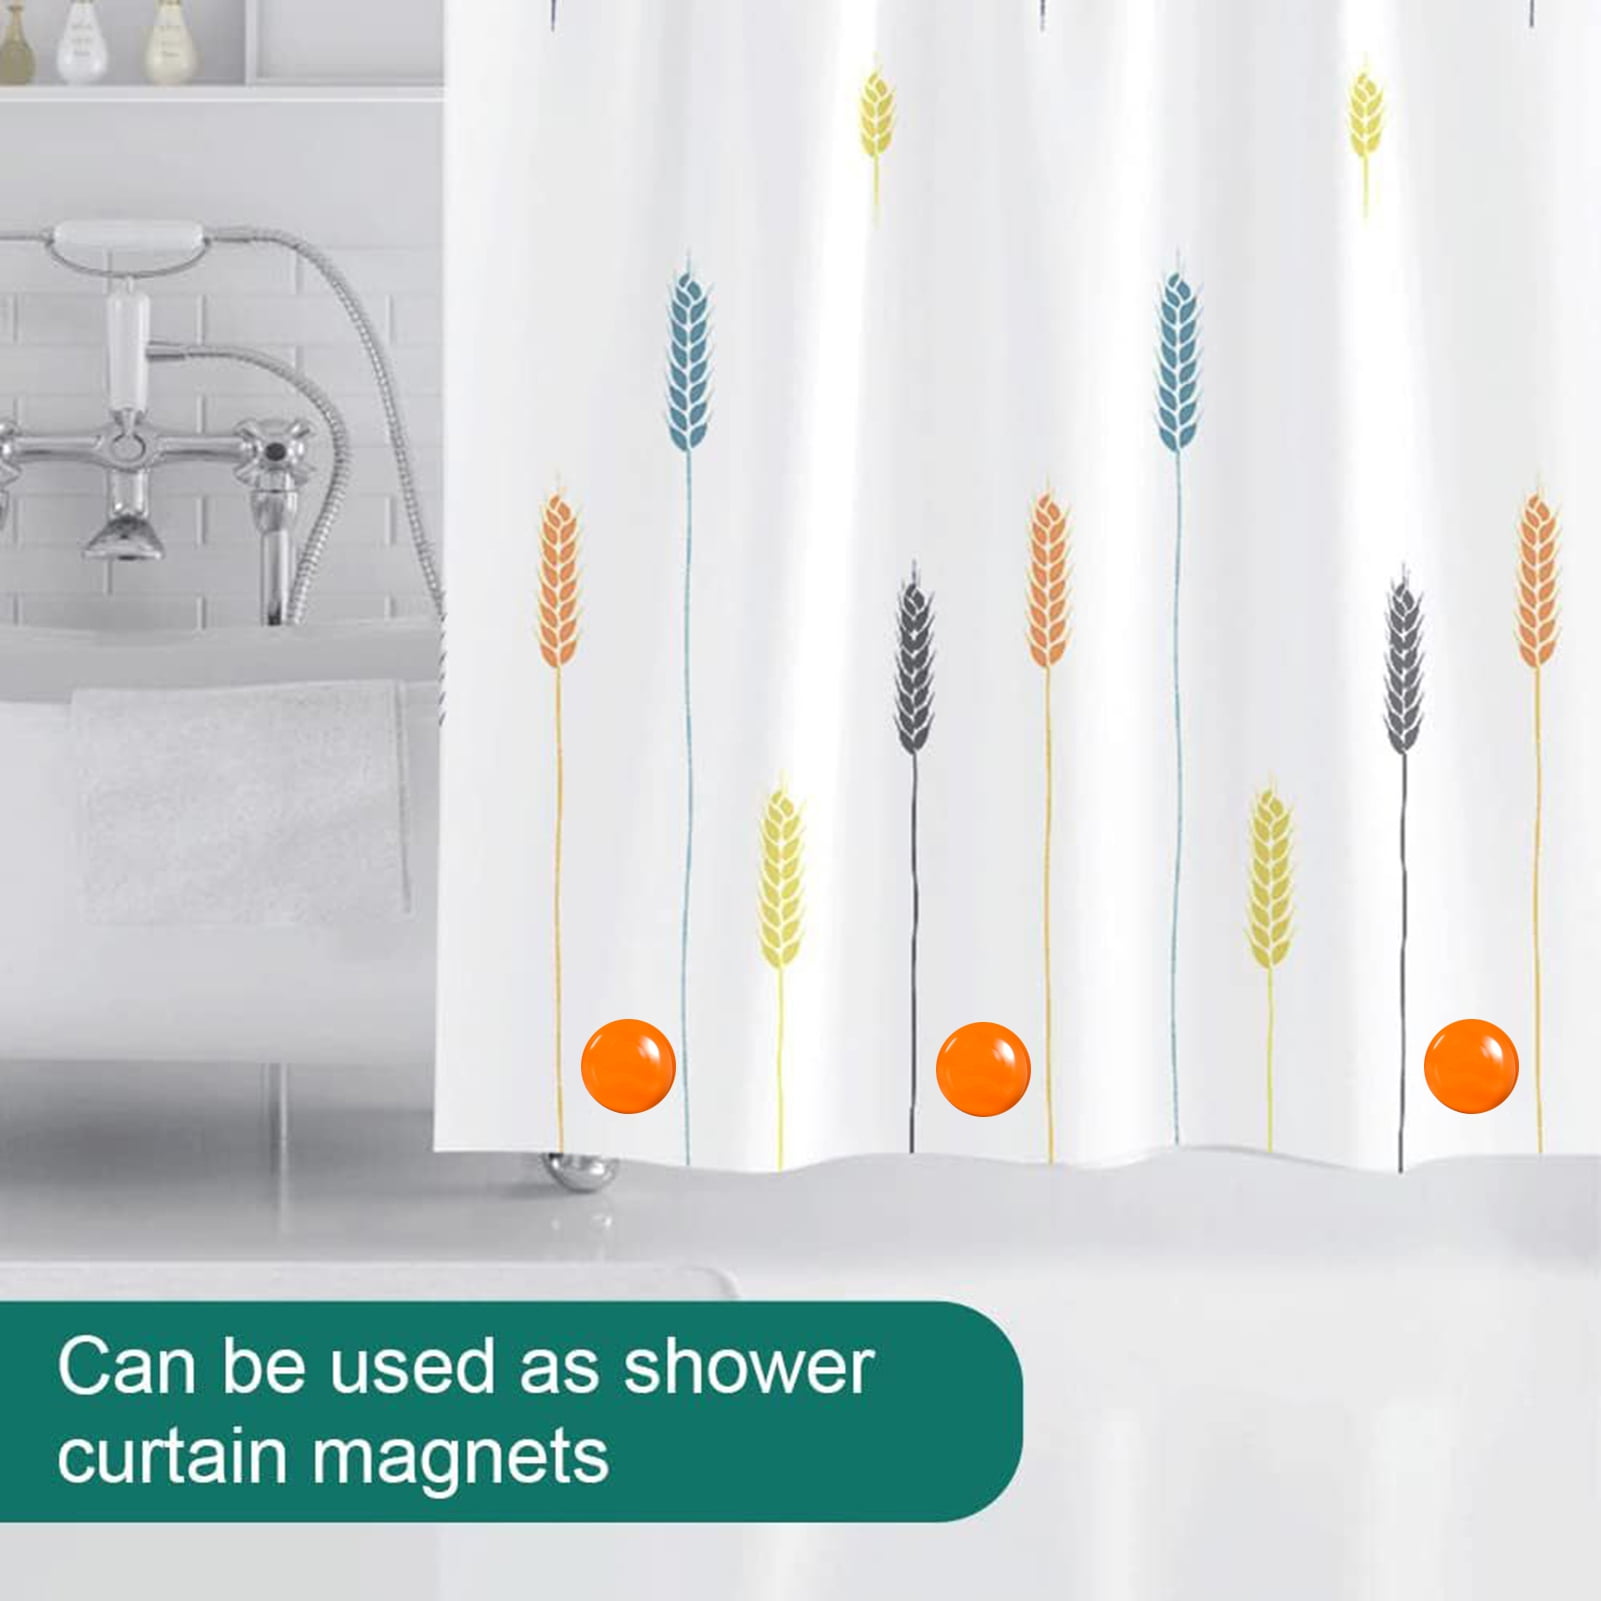  Magnetic Curtain Weights 8 Pack of Waterproof Magnets +  Carrying Case, Great Home Decor for Bathroom, Shower, Liner, Flags, and  Sheer, Heavy Duty Works Outdoor to Stop Wind (8 Pack, White) 